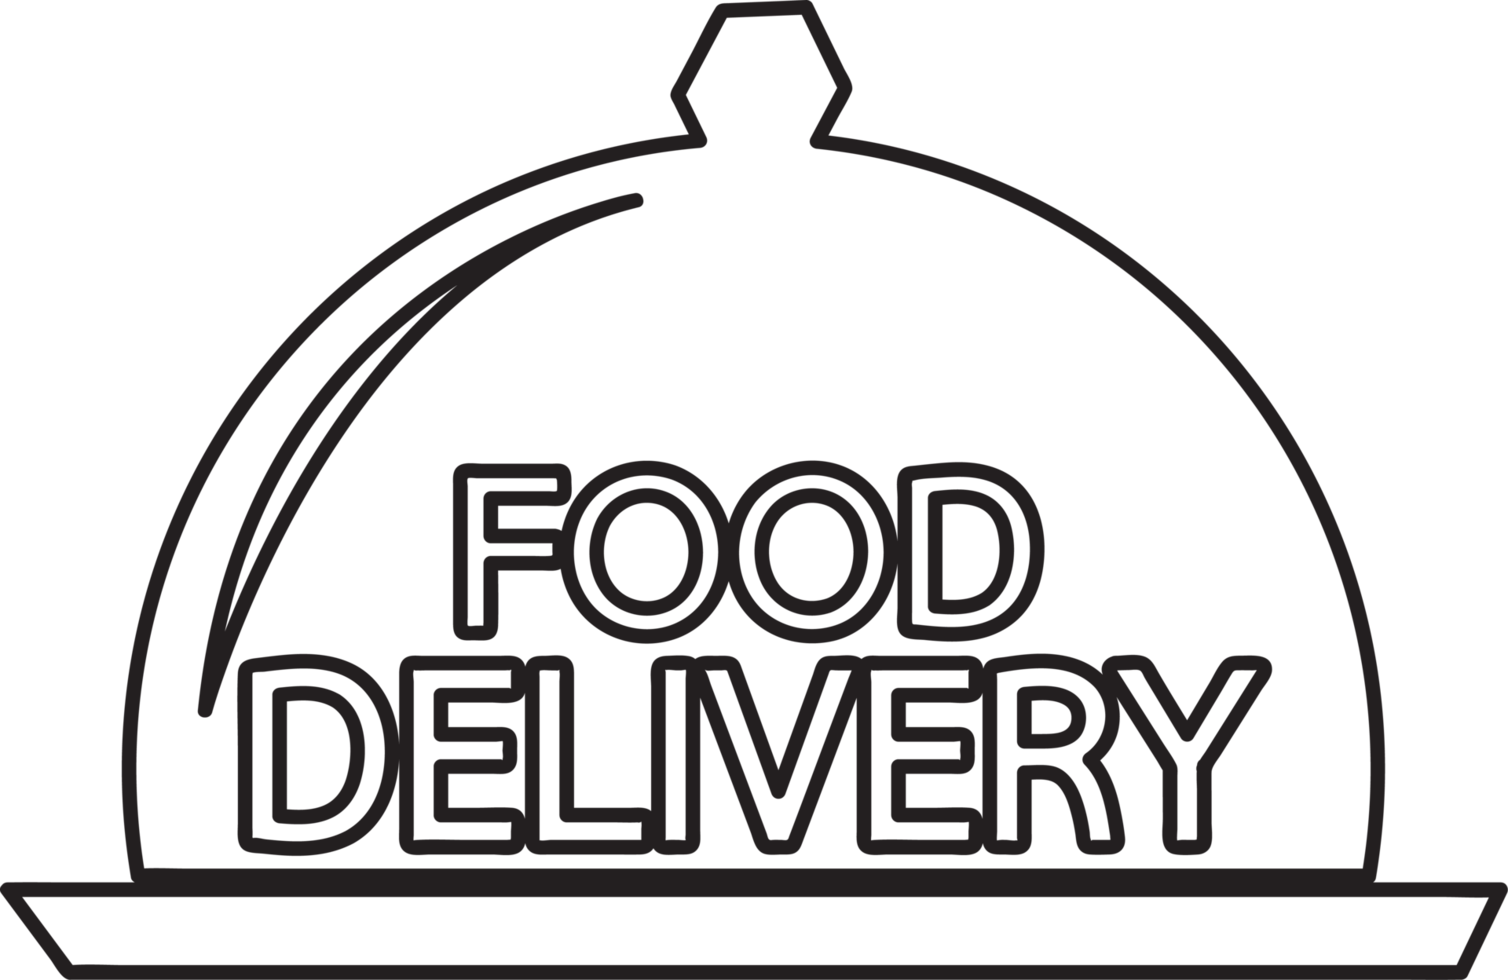 Food delivery icon sign symbol design png